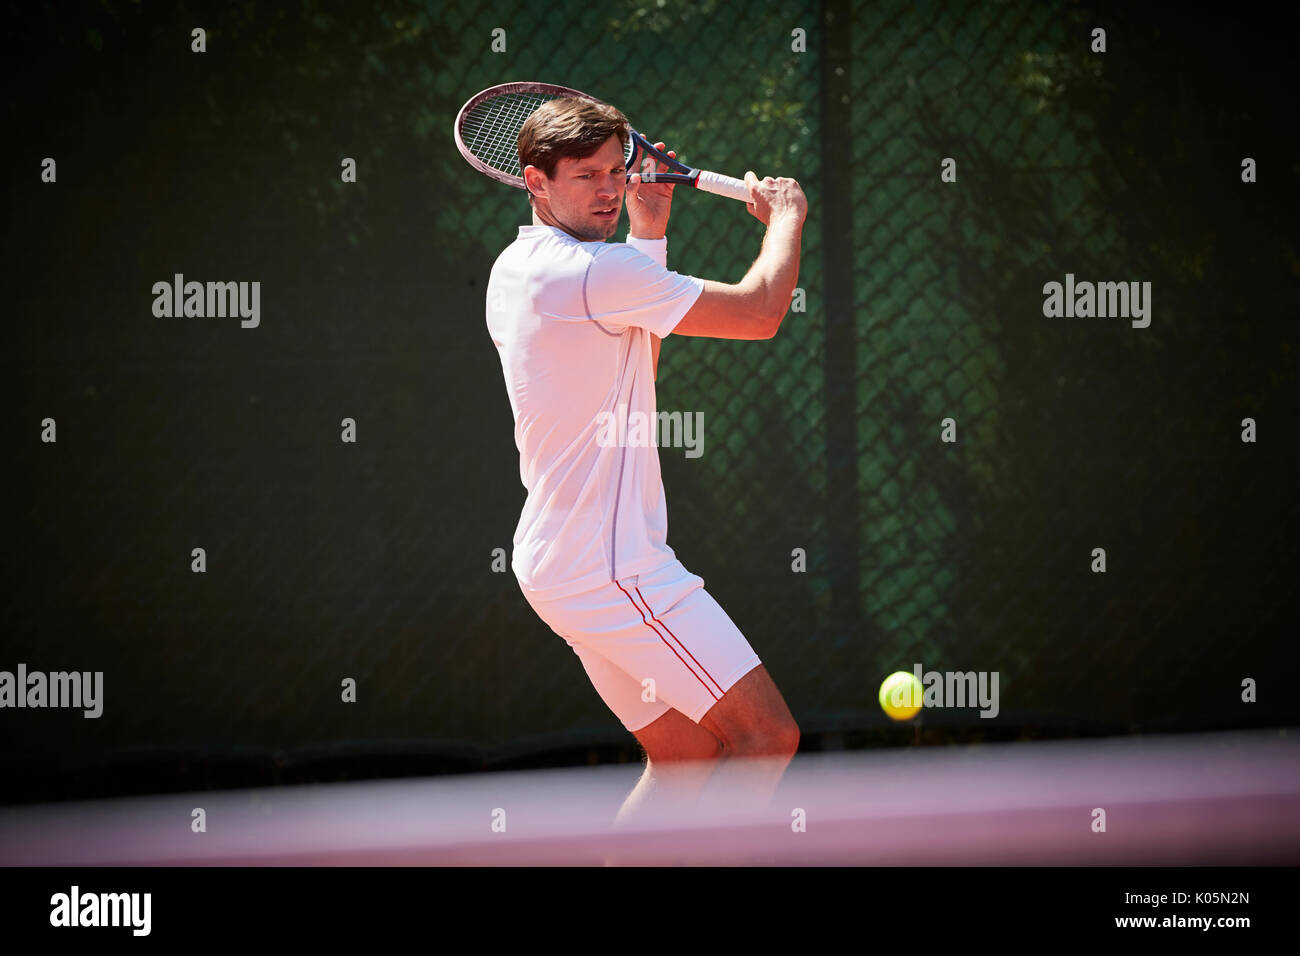 Young male tennis player playing tennis, swinging at tennis ball on sunny tennis court Stock Photo